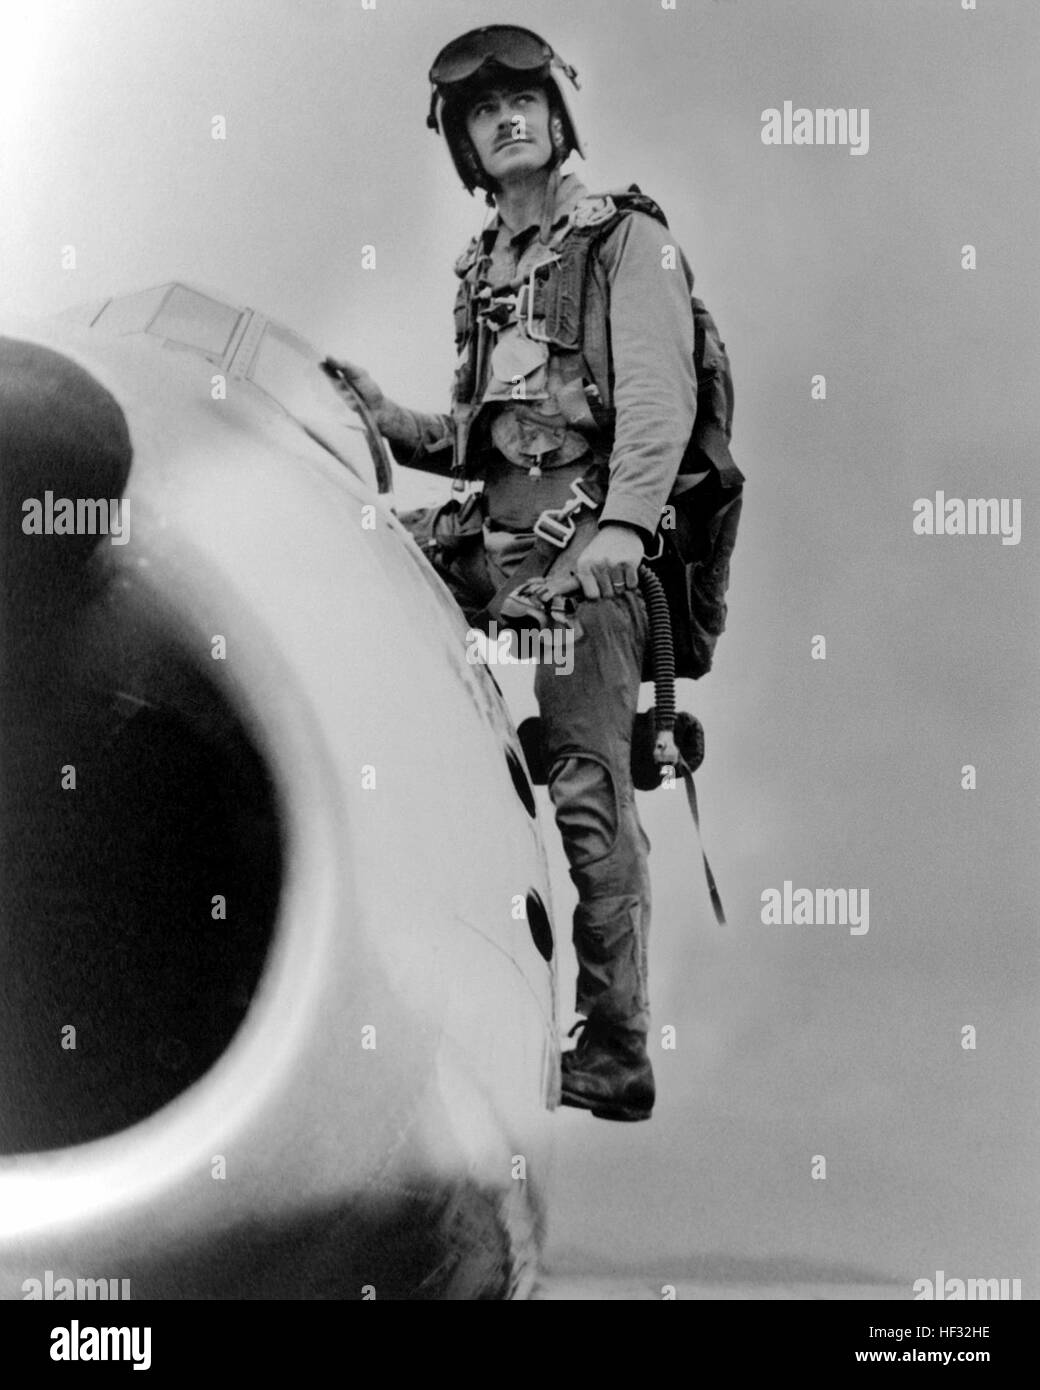 A Korean War era photograph of US Marine Corps (USMC) Major (MAJ) John F. Bolt, assigned to the 1st Marine Aircraft Wing, as he exits his USMC F-86 'SABER' jet aircraft. MAJ Bolt is the USMC first 'Jet Ace' credited with 6 kills, plus he shot down six Japanese planes during World War II (WWII). His hometown is Sanford, Florida.  (Exact date shot unknown) Photograph of U.S. Marine Corps Major John F. Bolt Stock Photo